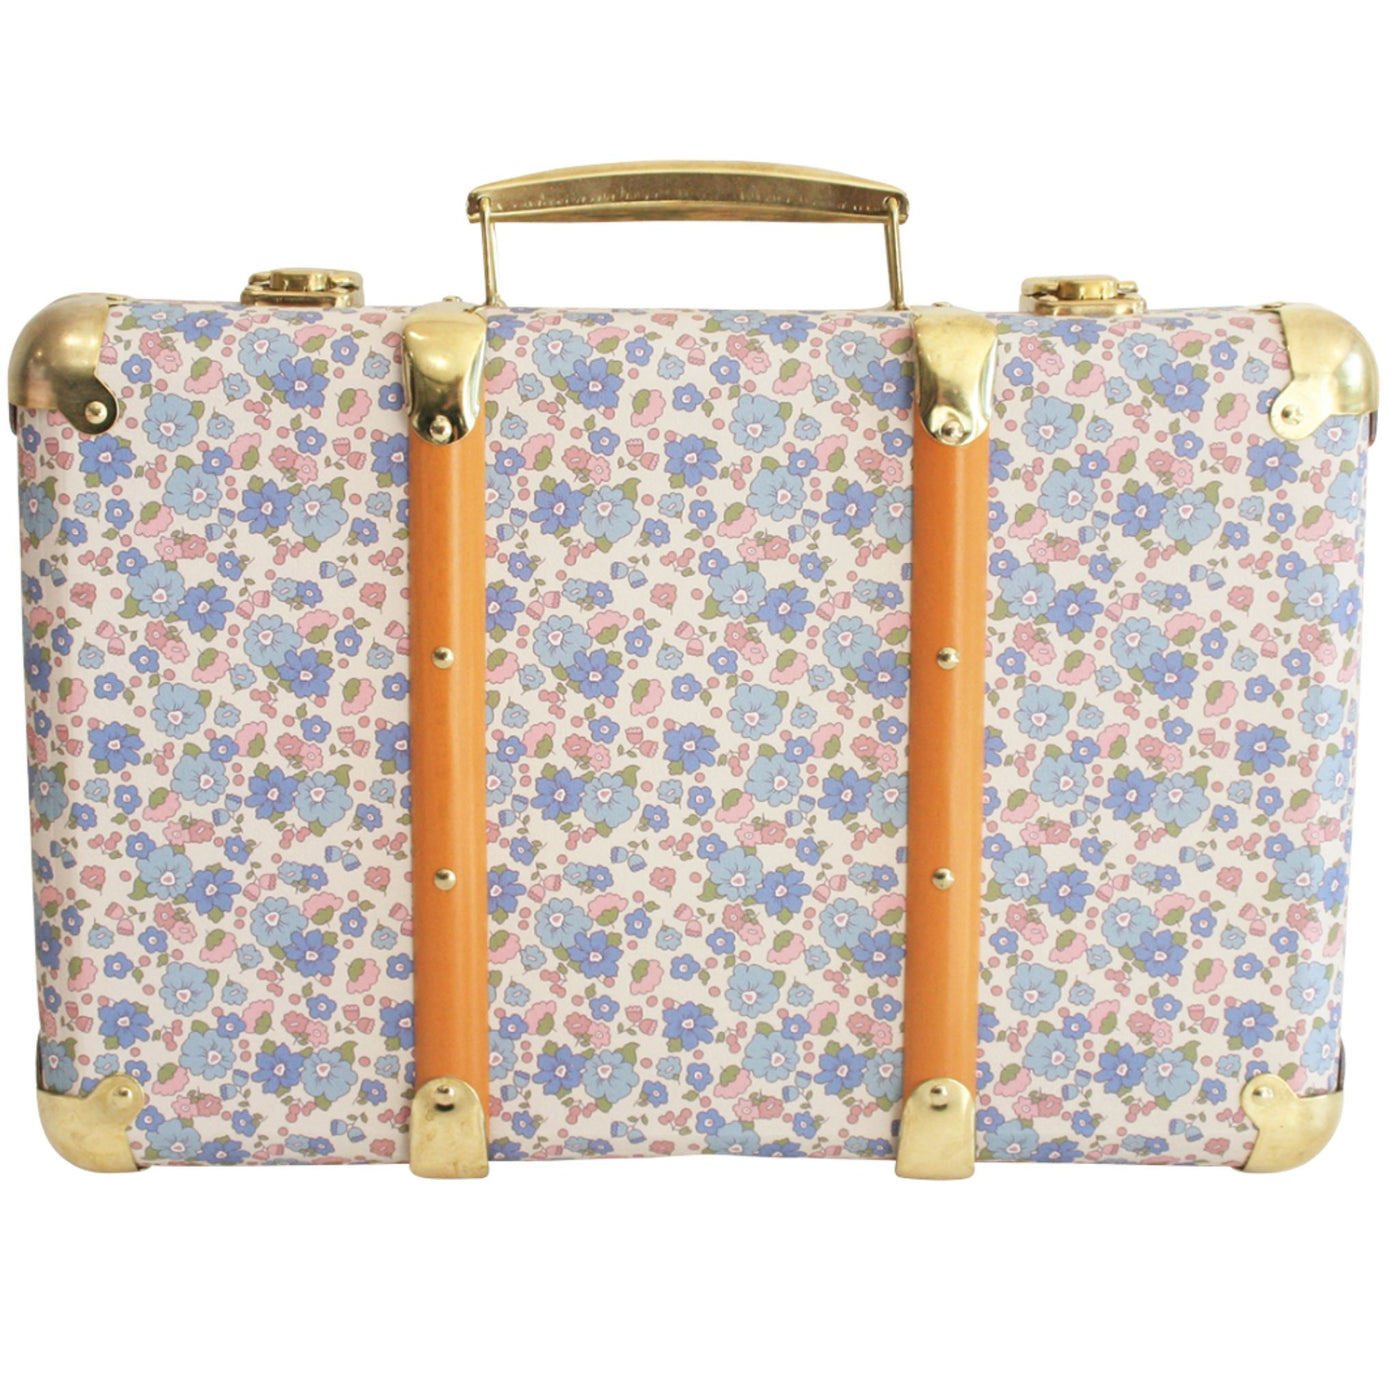 Alimrose Vintage Style Carry Case in Liberty Blue